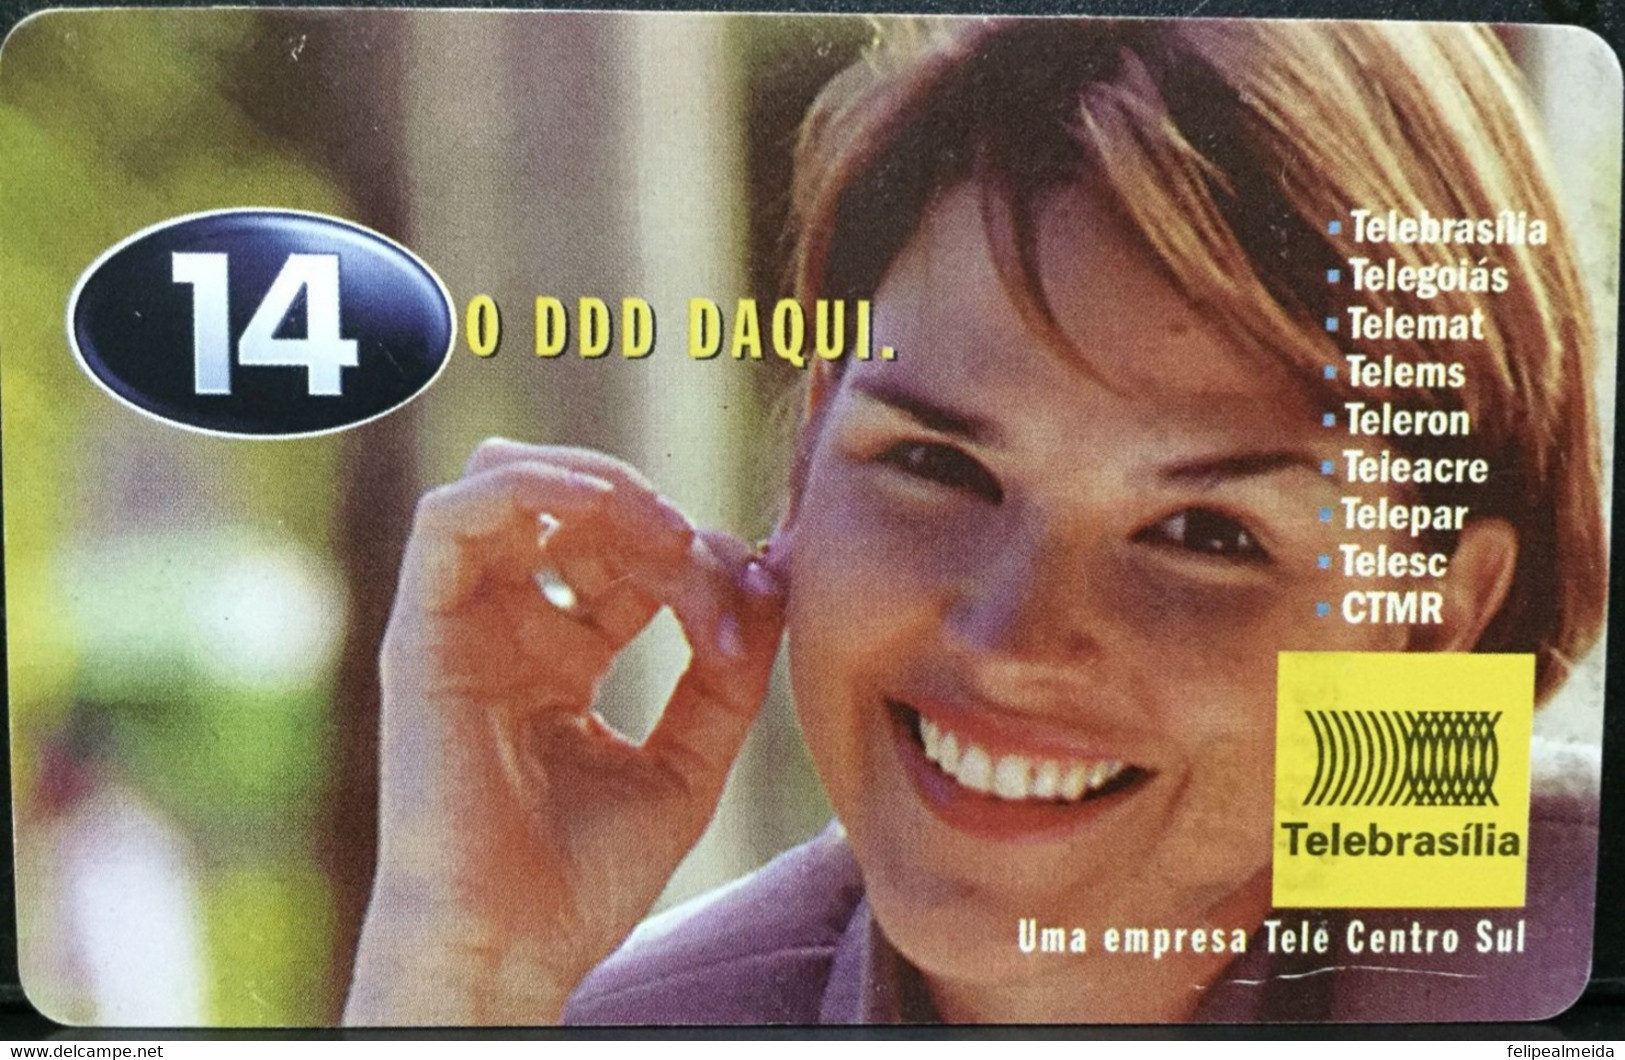 Phone Card Manufactured By Telebrasilia In 1999 - Information Card On The Use Of DDD In Calls - Telekom-Betreiber